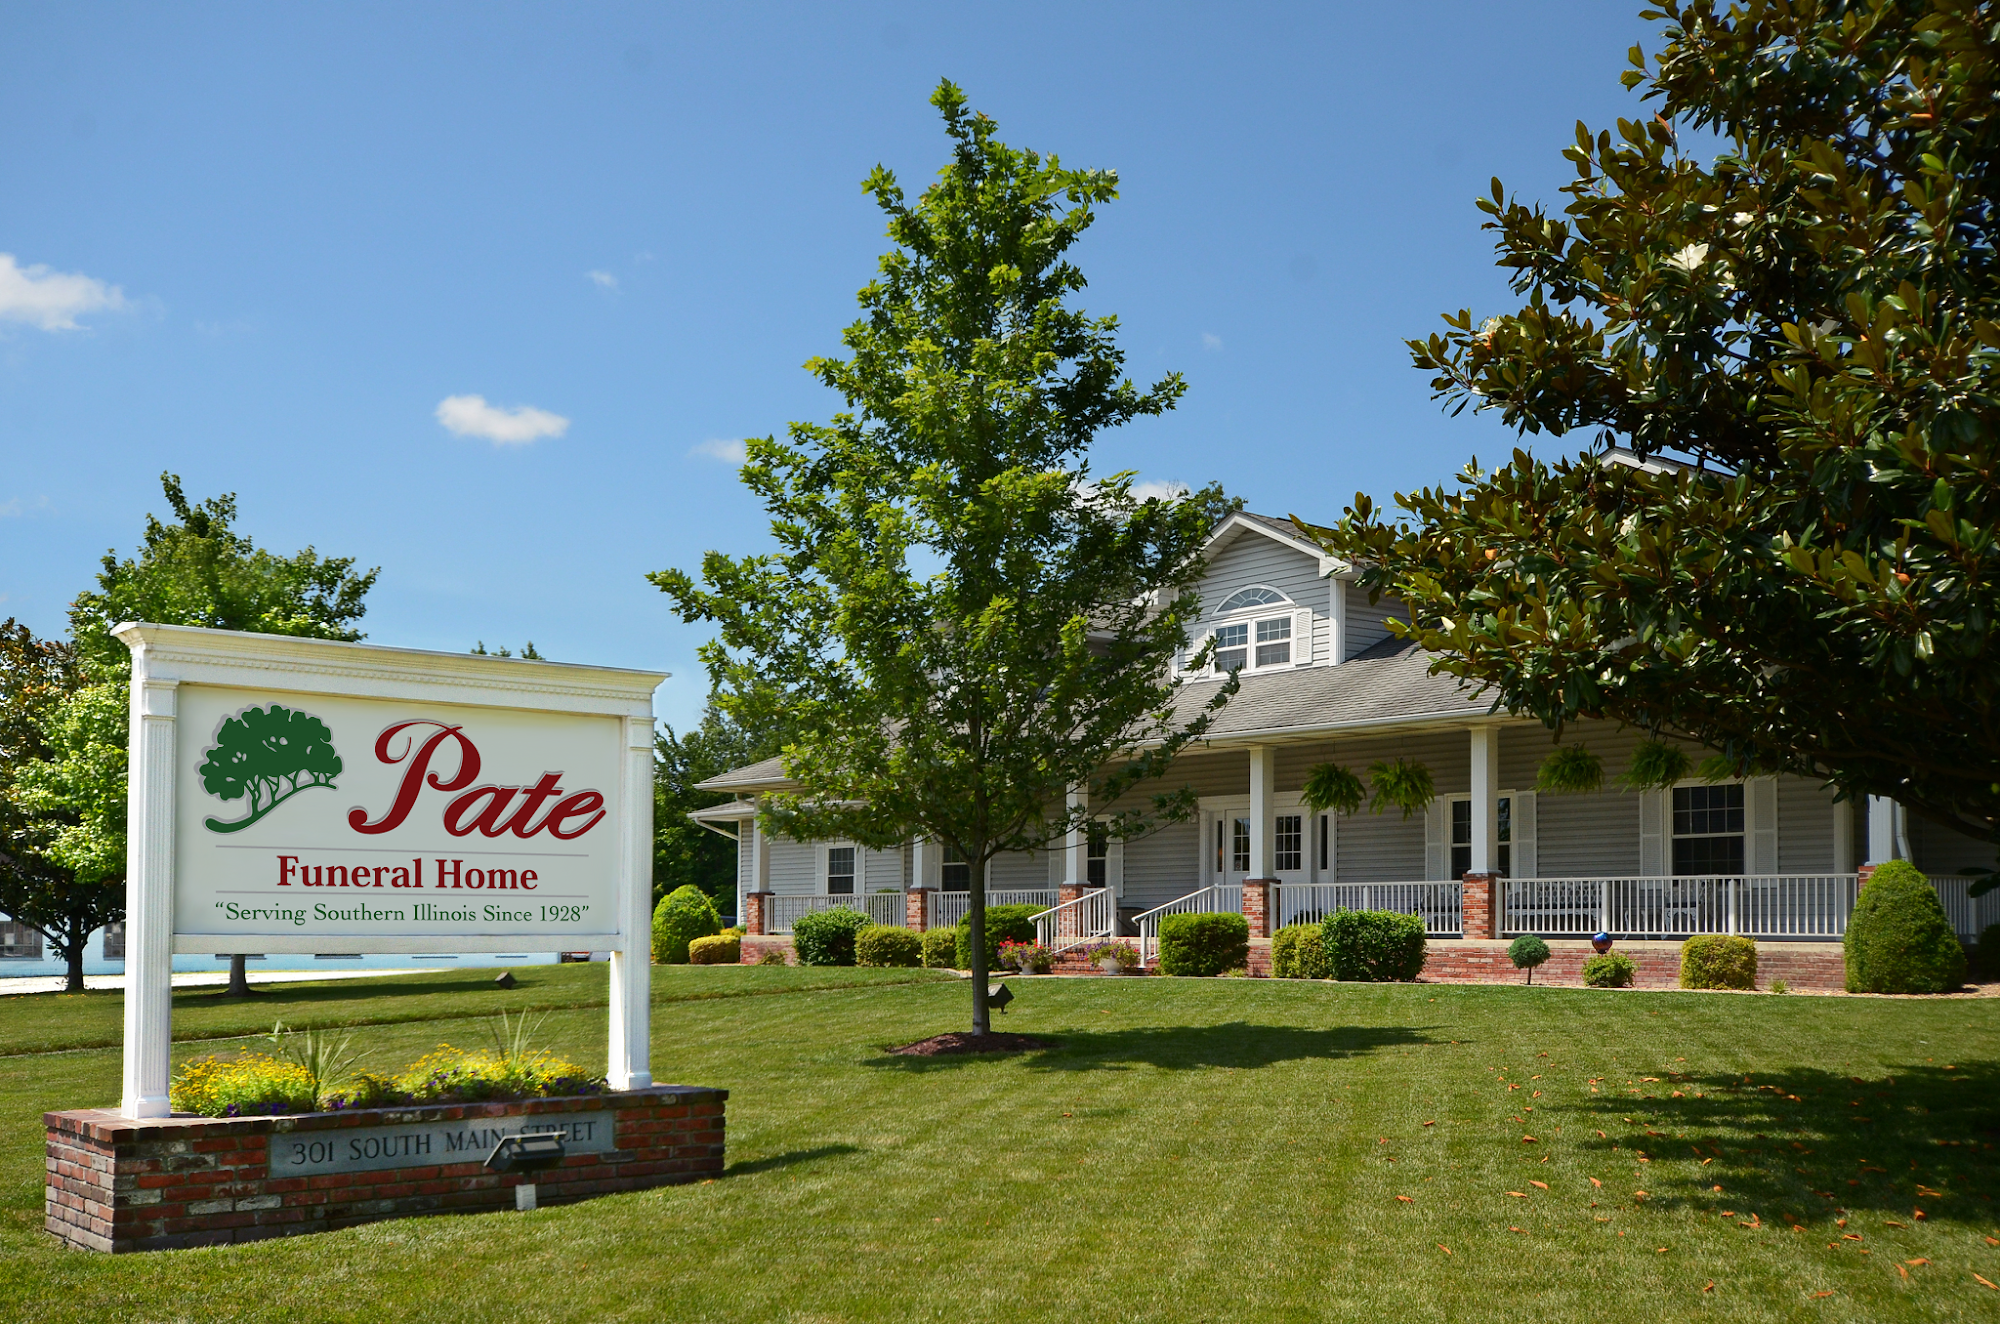 Pate Funeral Home & Crematory